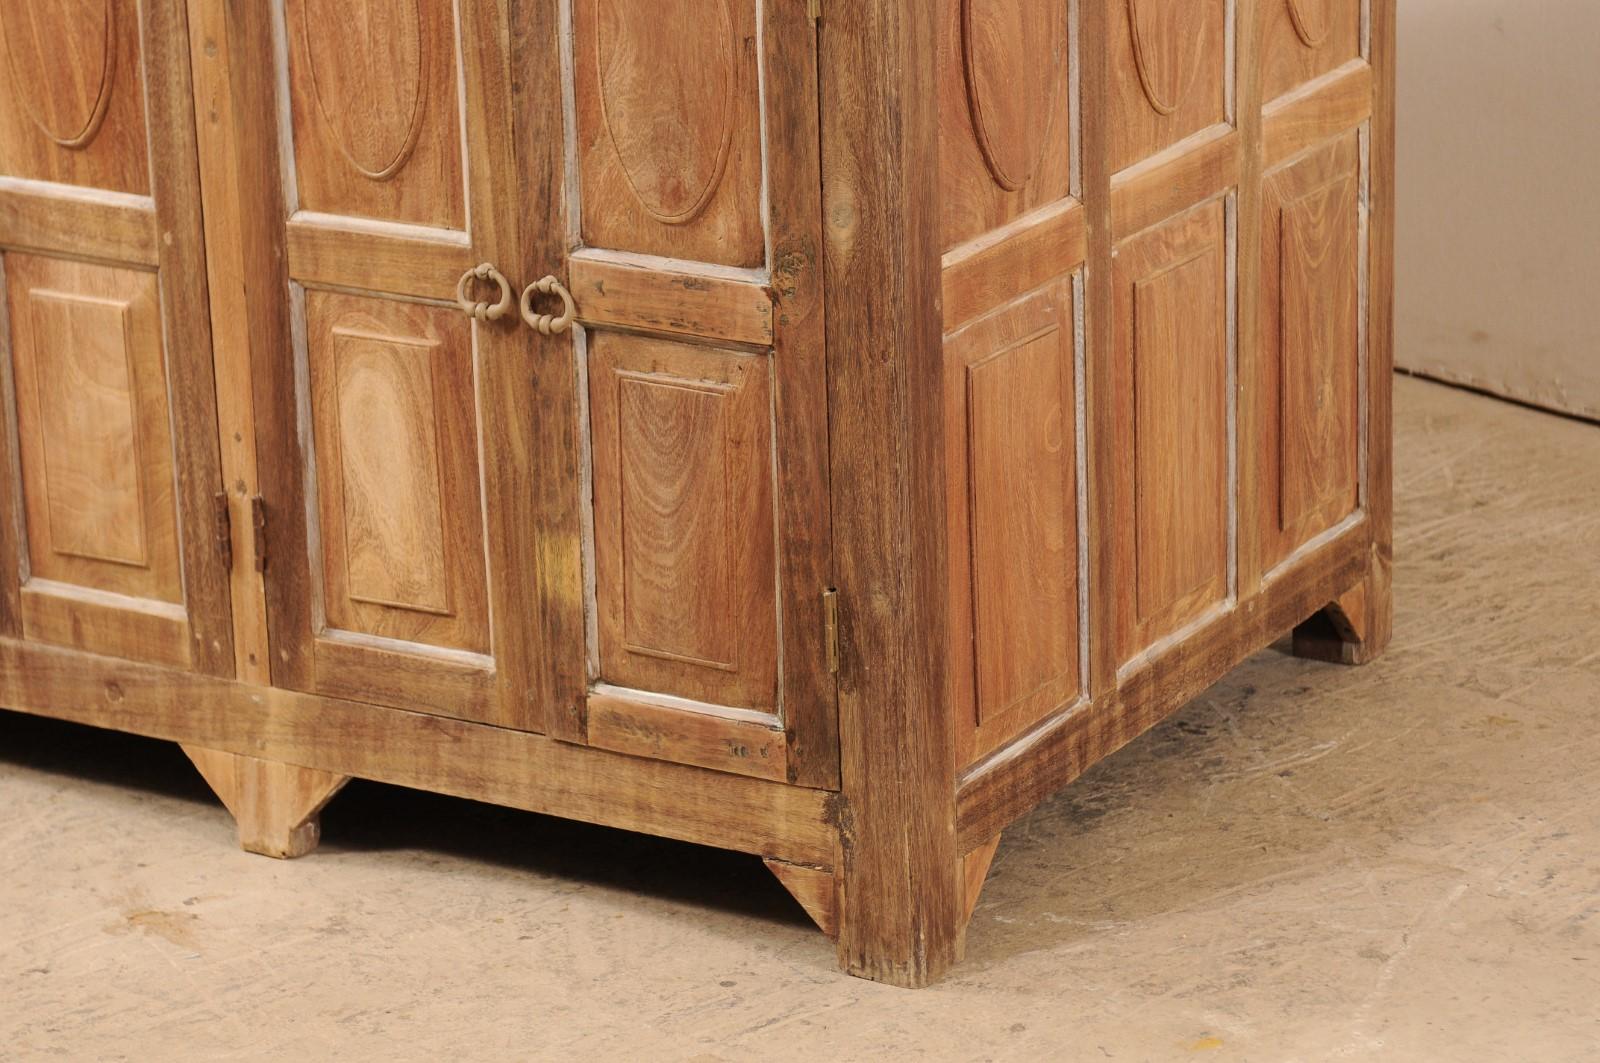 20th Century Antique British Colonial Decoratively-Paneled Cabinet- Great for Kitchen Island!